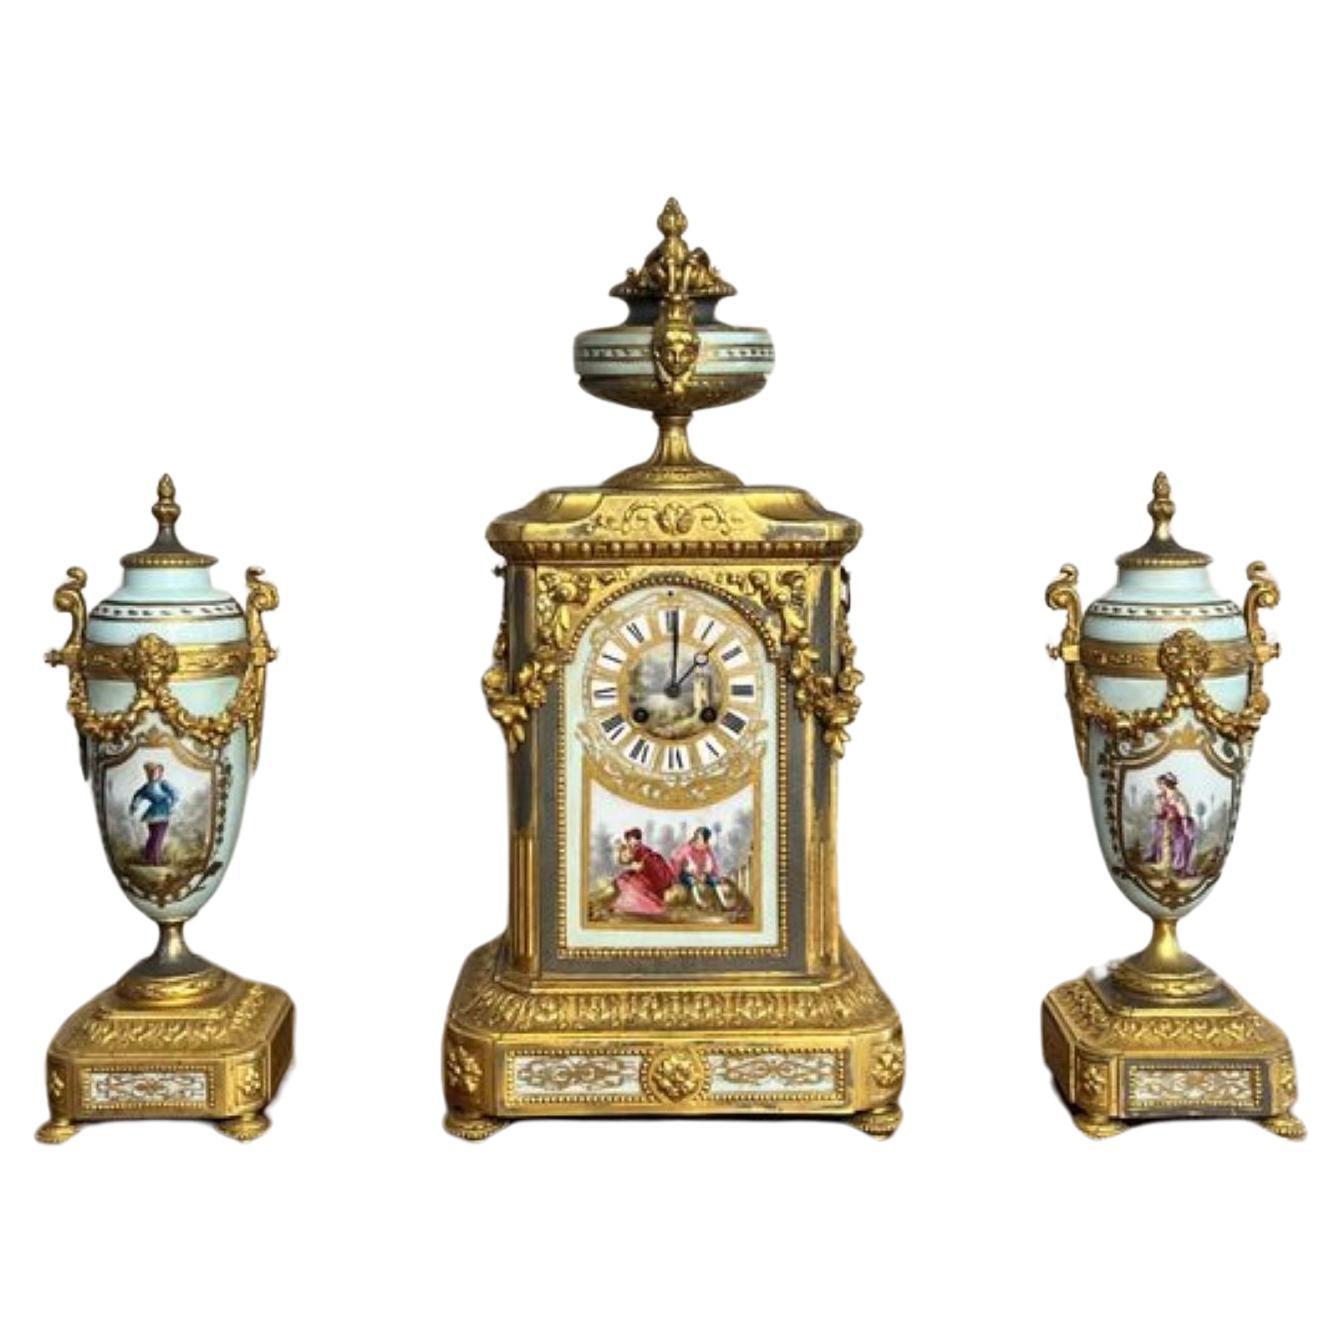 Outstanding quality antique Victorian French mantle clock garniture set 